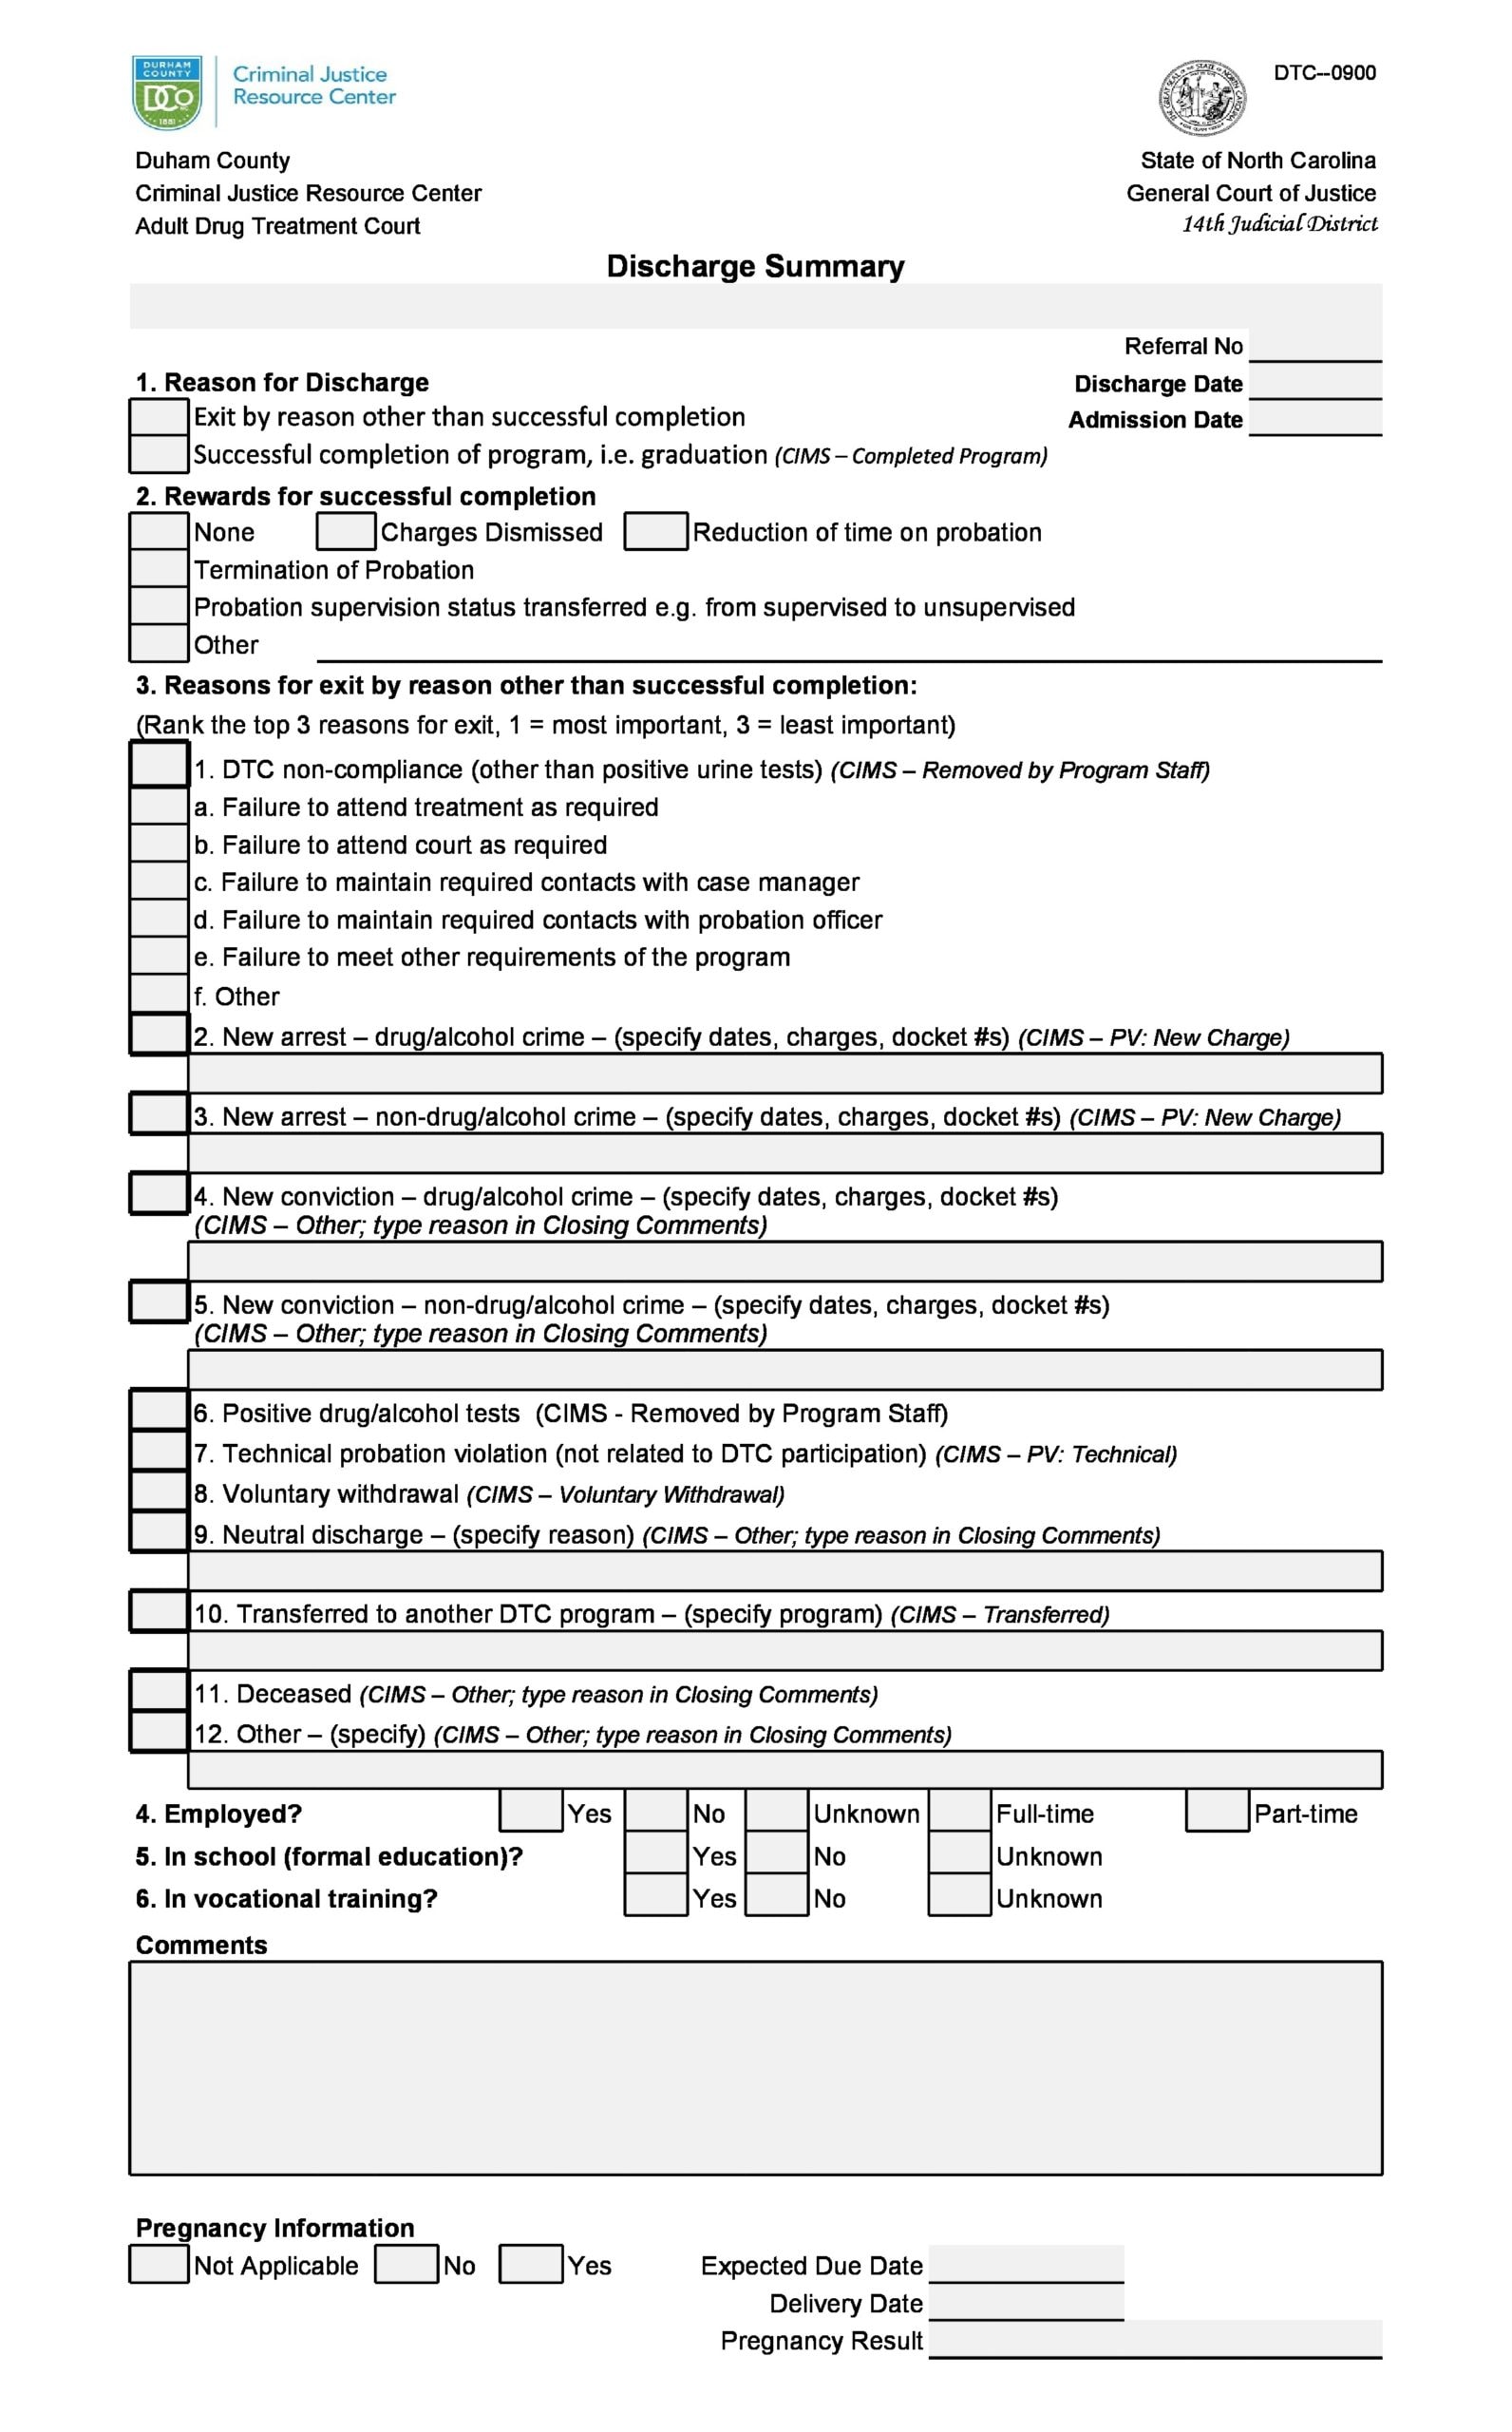 30 Hospital Discharge Summary Templates (& Examples)